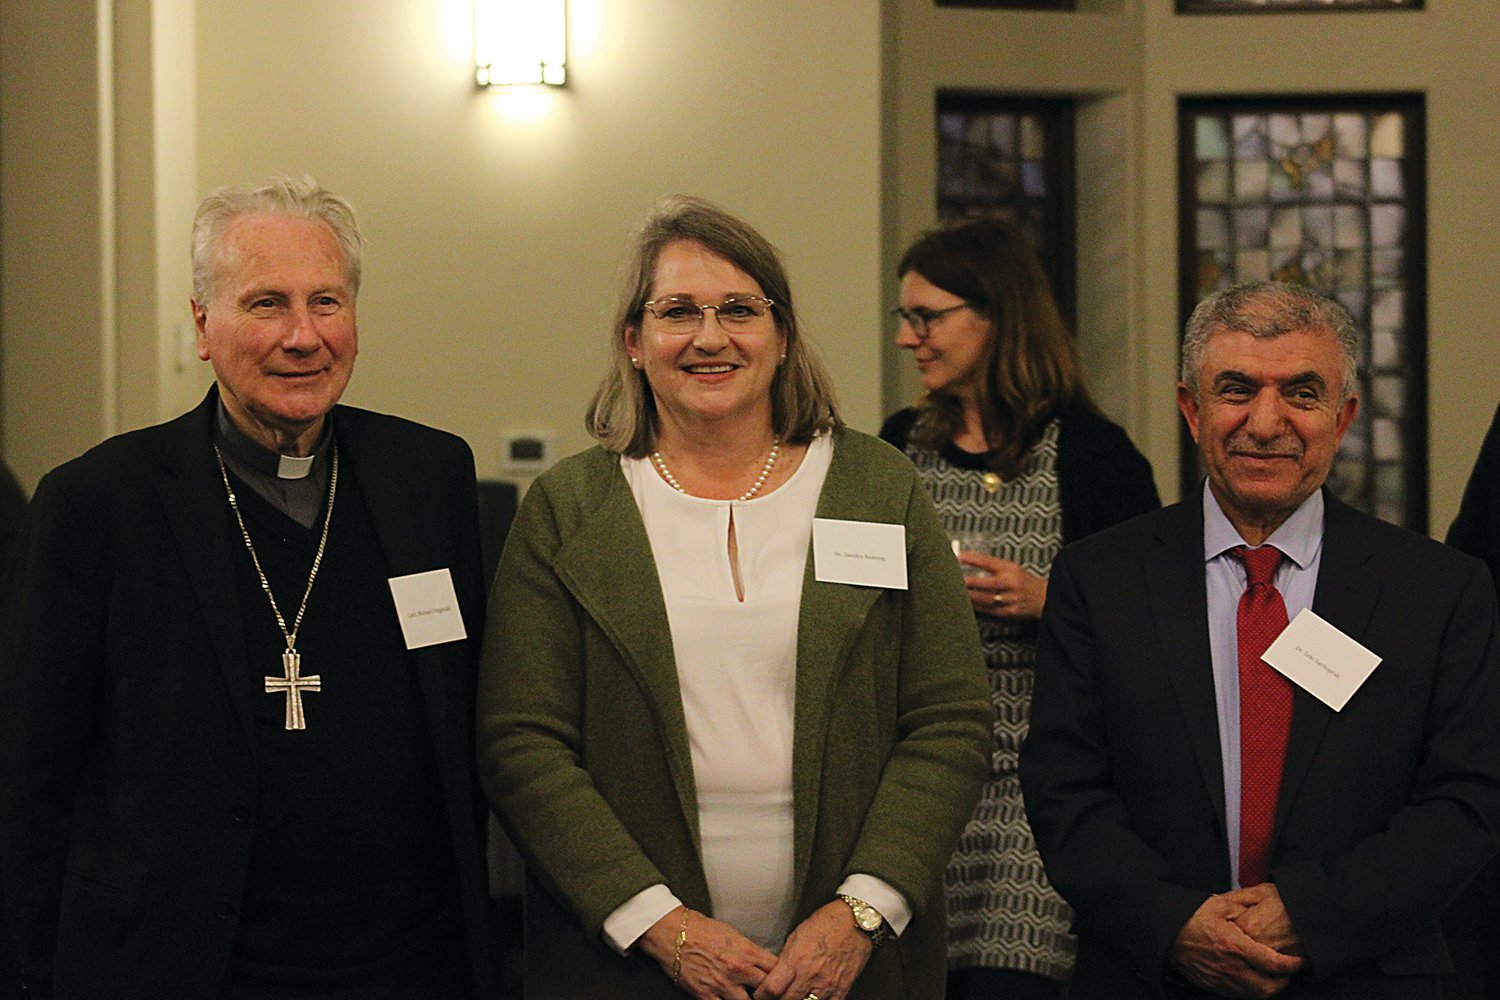 Dr. Sandra Keating gathers with speakers Cardinal Michael Fitzgerald and Dr. Zeki Saritoprak after the lectures.